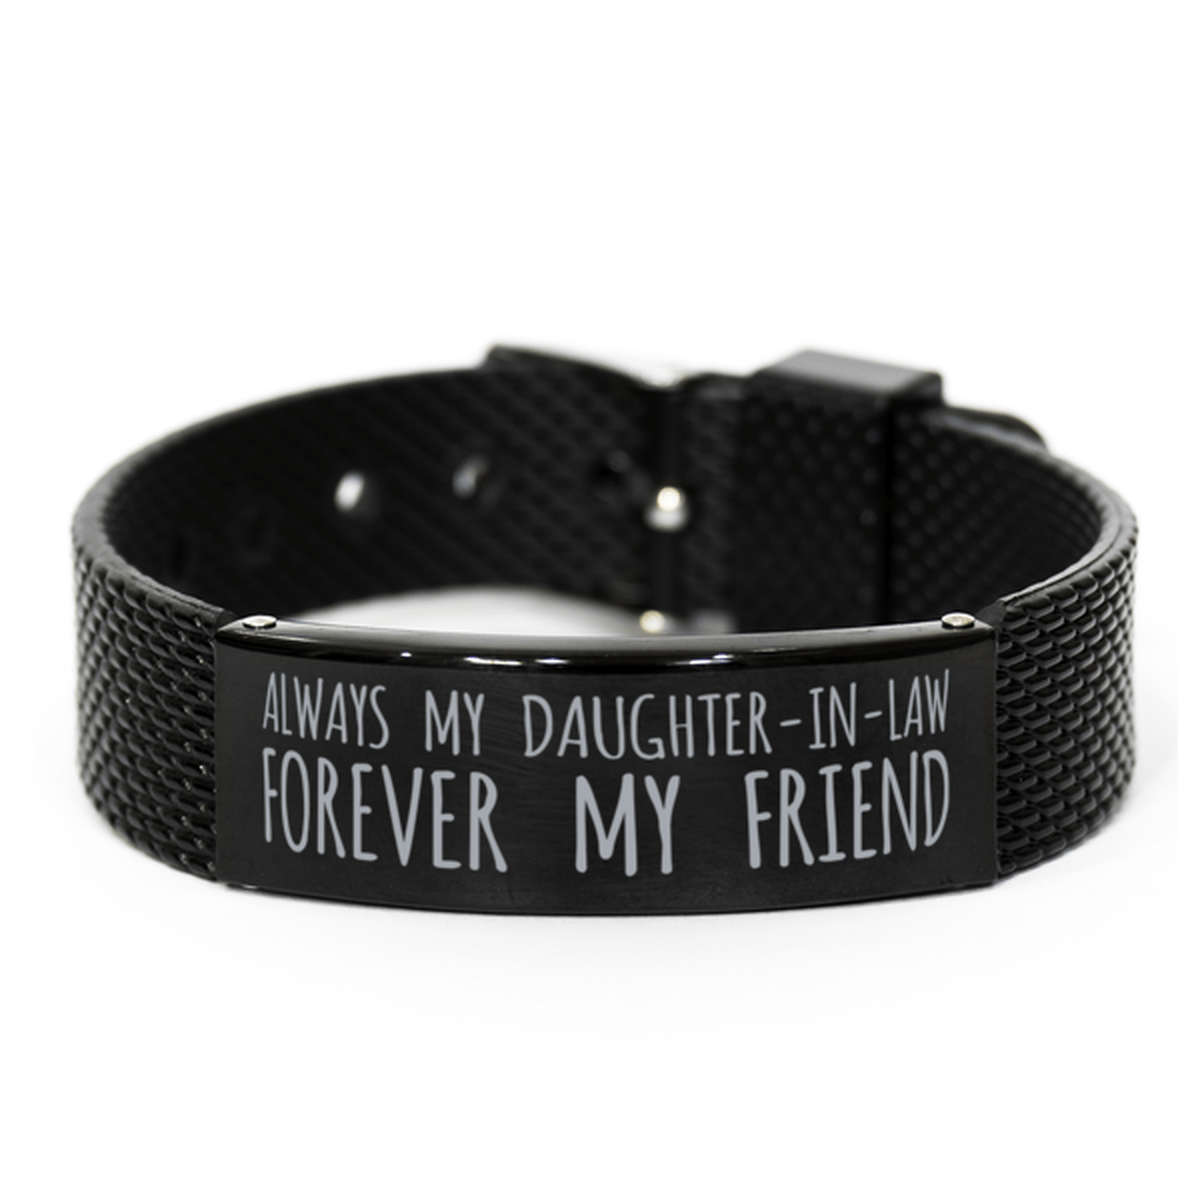 Inspirational Daughter-In-Law Black Shark Mesh Bracelet, Always My Daughter-In-Law Forever My Friend, Best Birthday Gifts for Family Friends